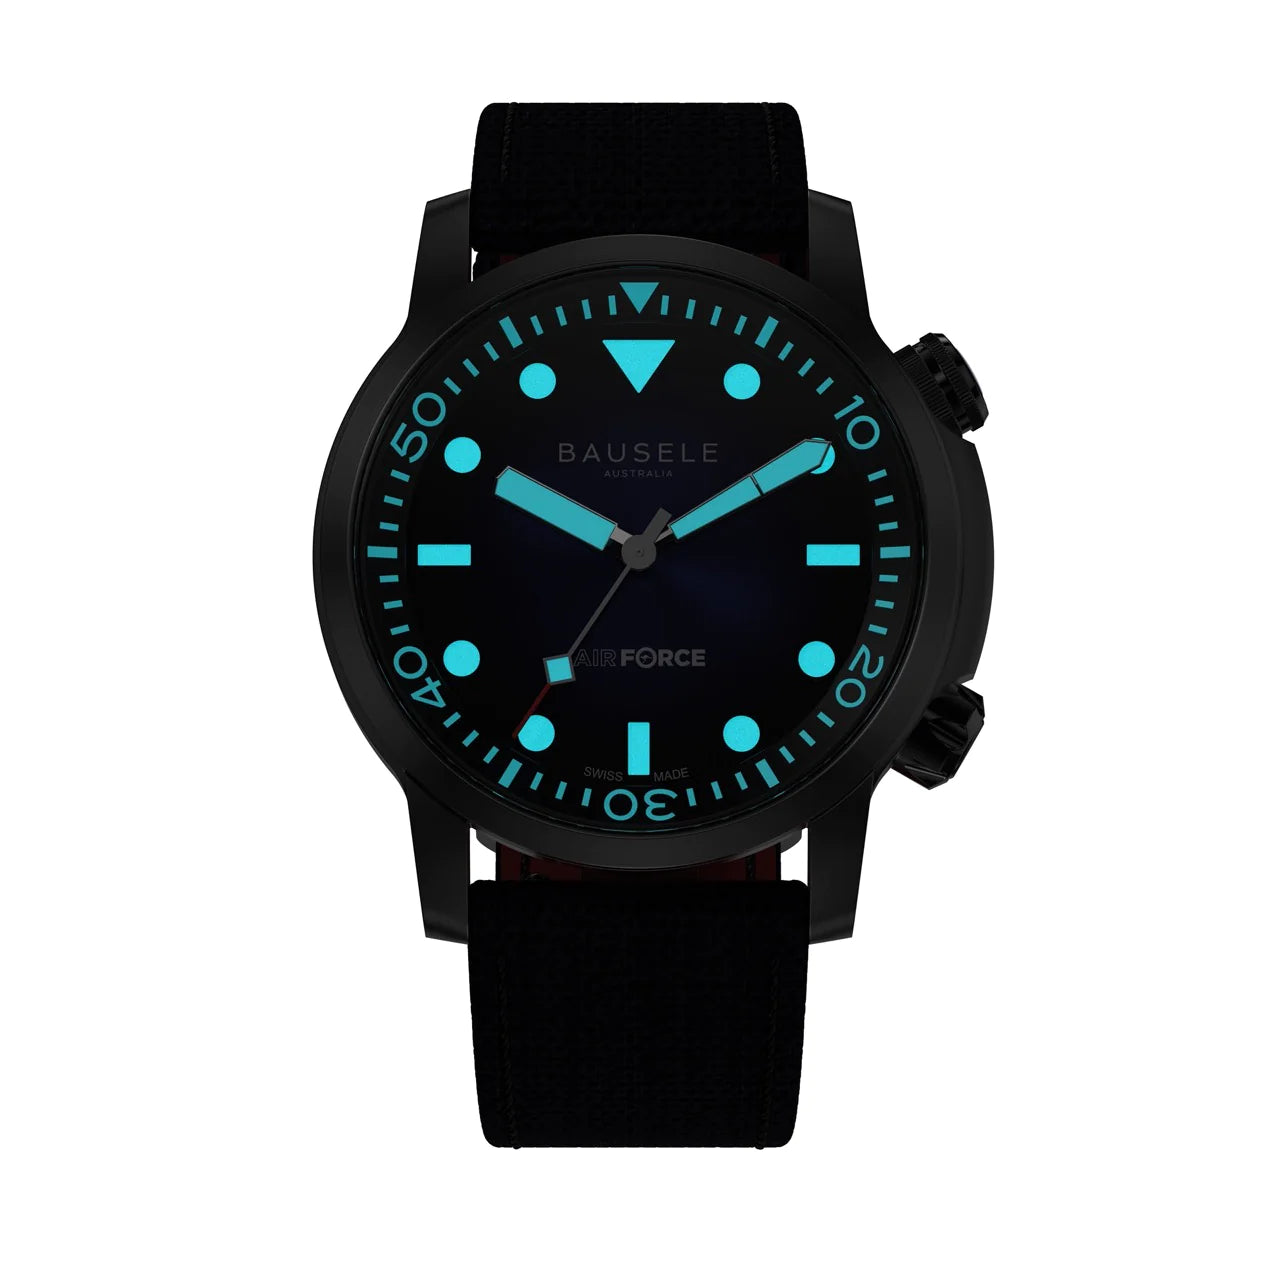 BAUSELE AIR FORCE 5th GENERATION LIMITED EDITION